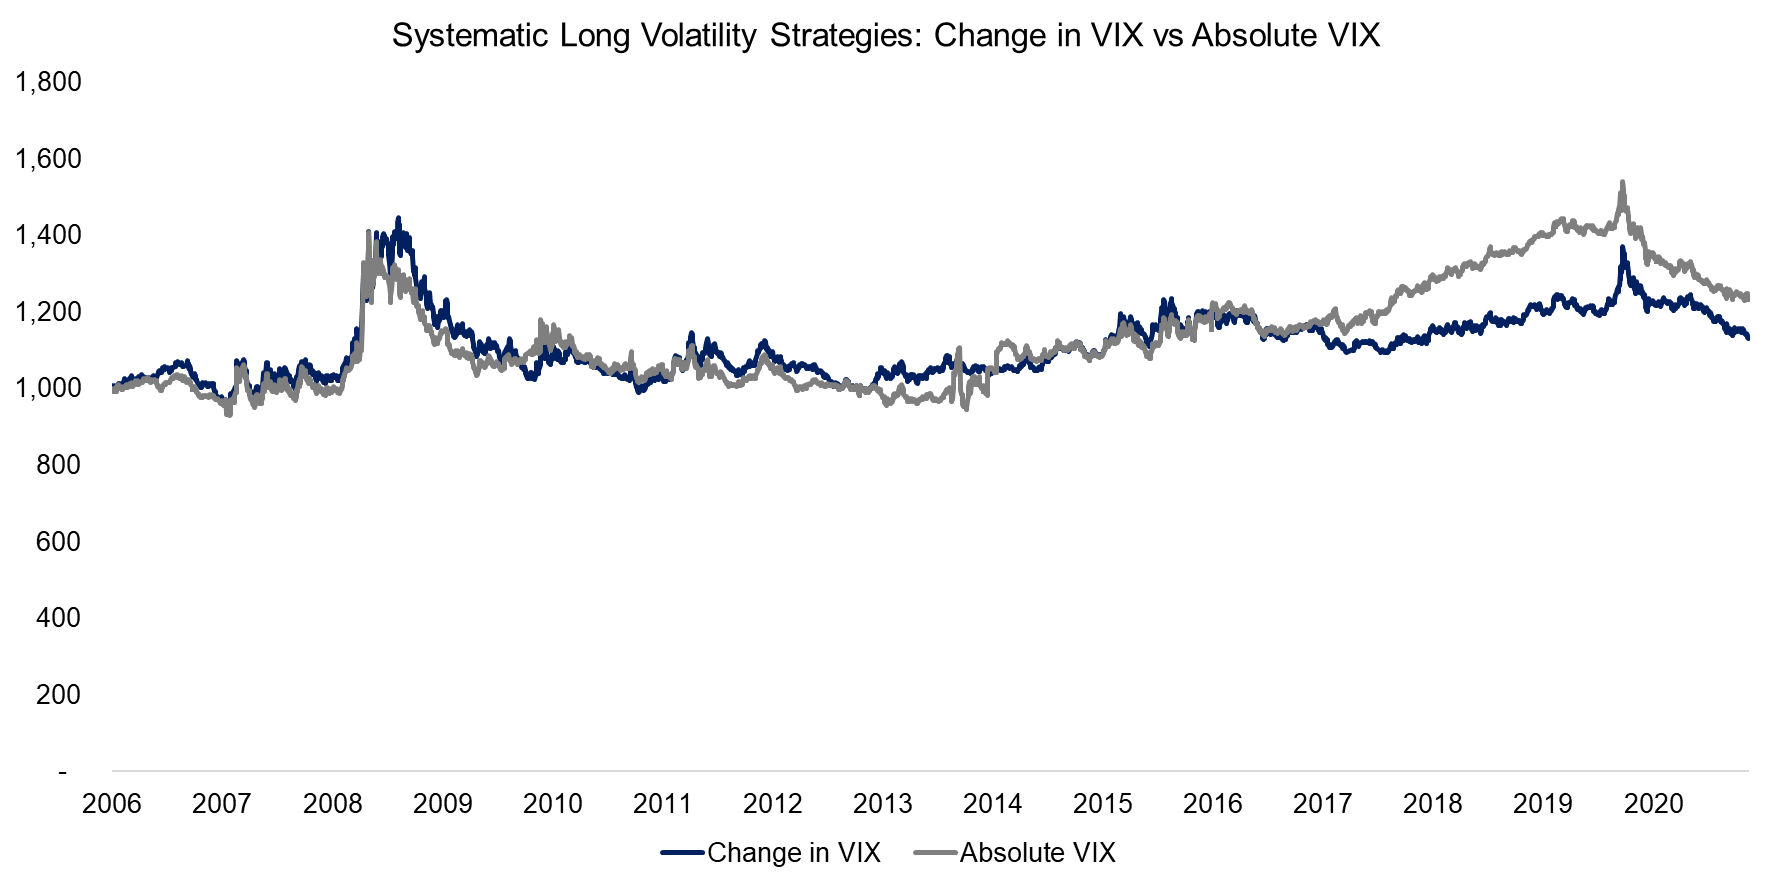 Systematic Long Volatility Strategies Change in VIX vs Absolute VIX